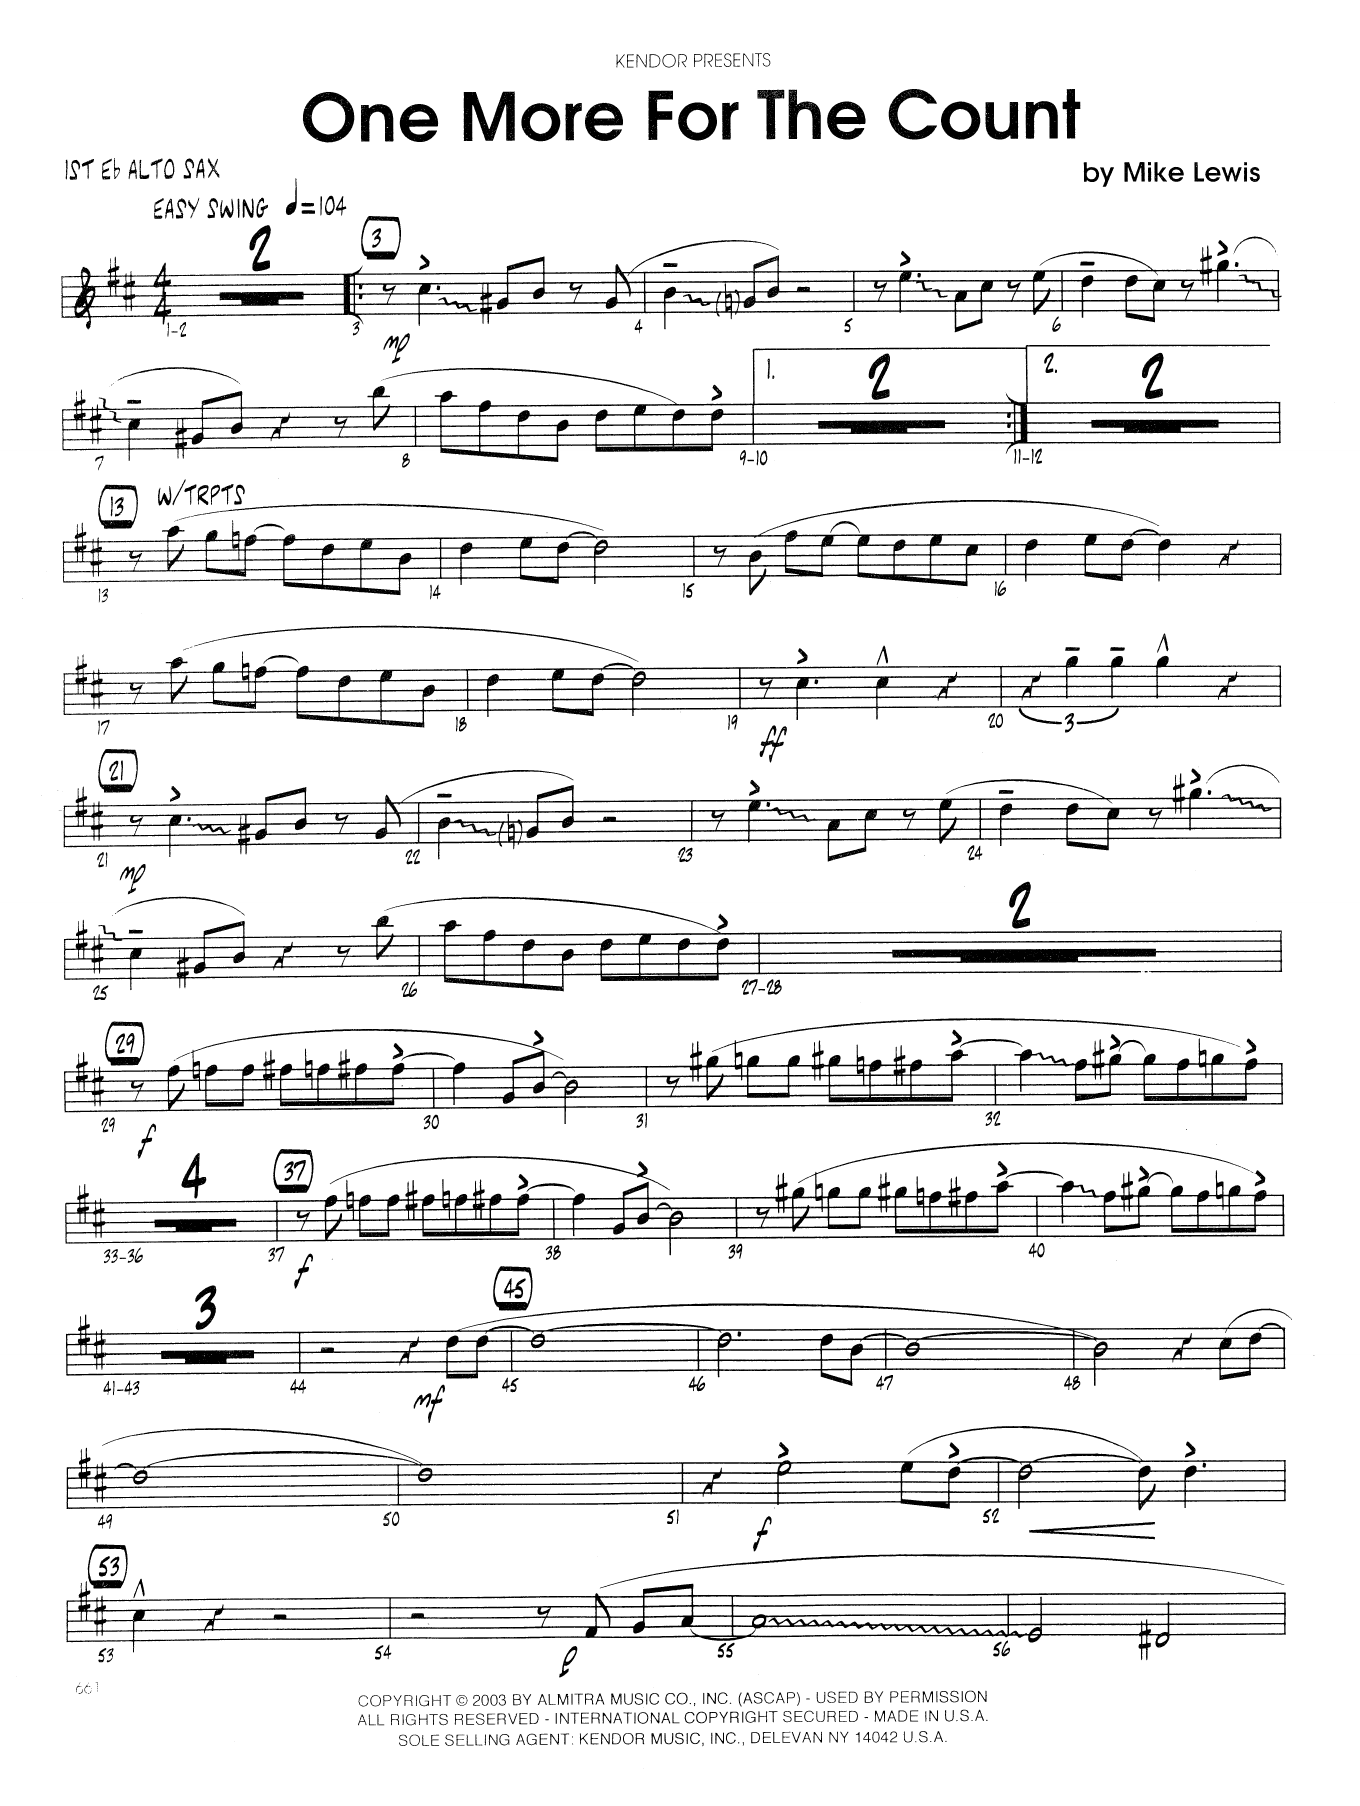 Download Mike Lewis One More For The Count - 1st Eb Alto Sa Sheet Music